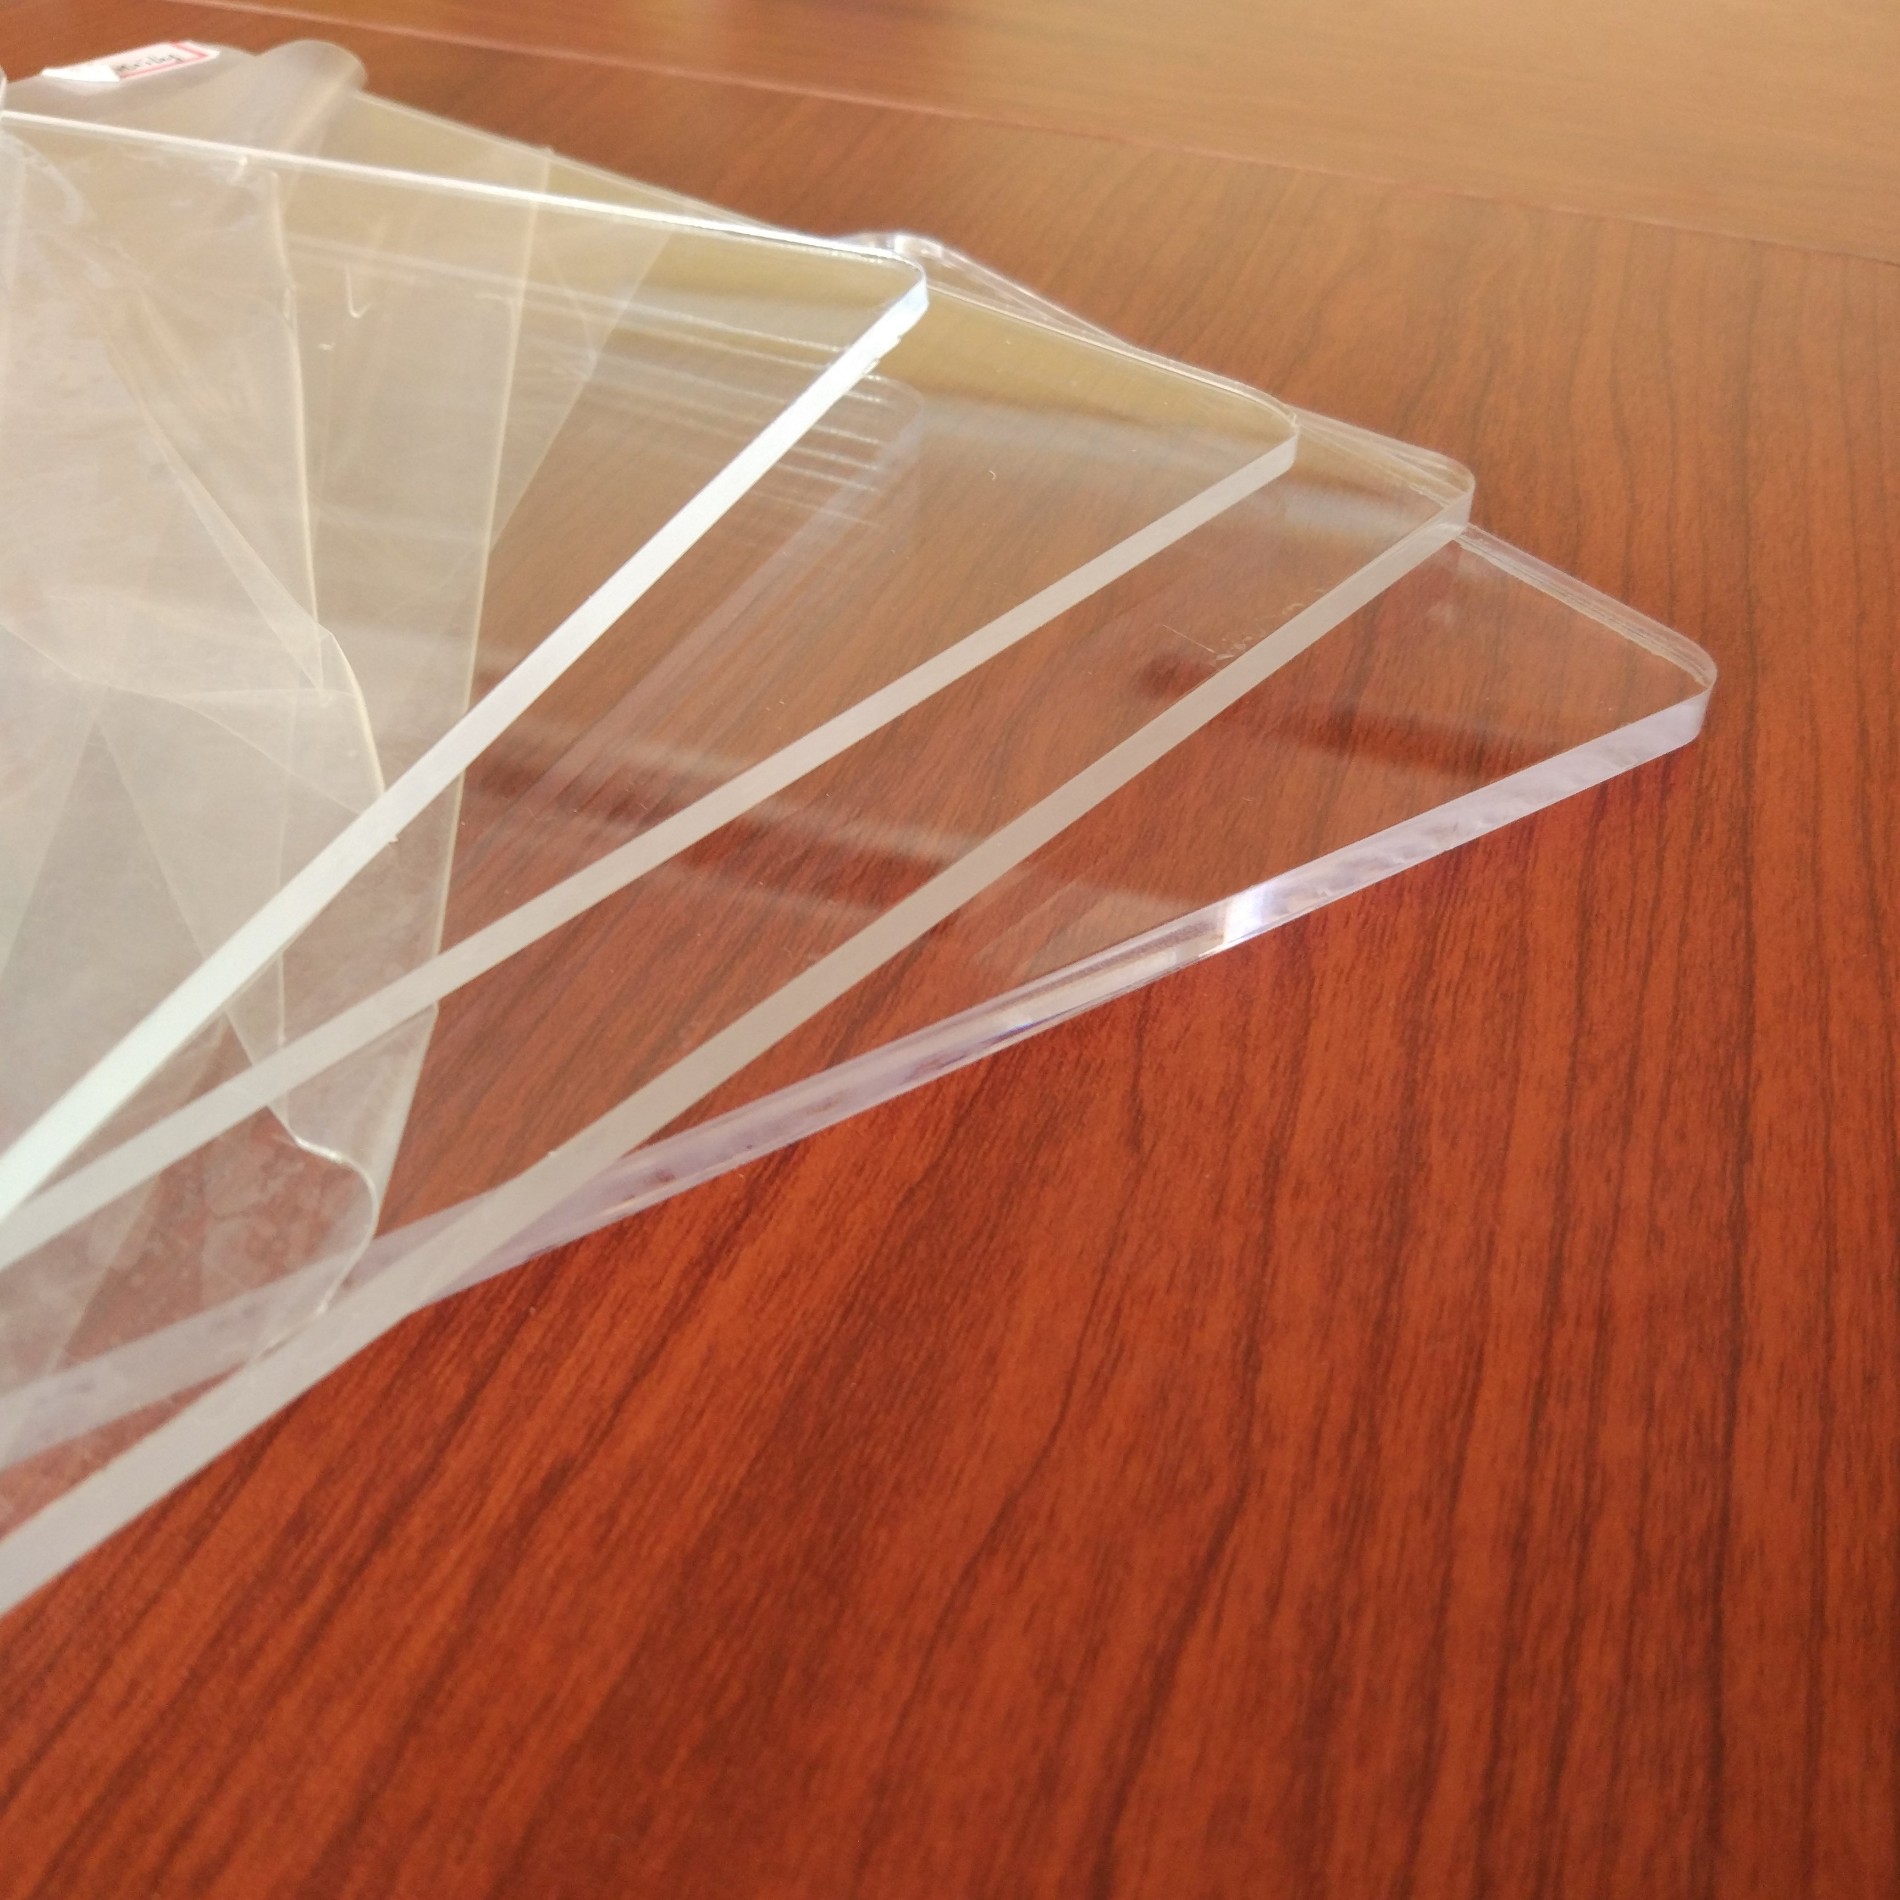 2mm 3mm 4mm 5mm 6mm thick clear acrylic sheets for barriers